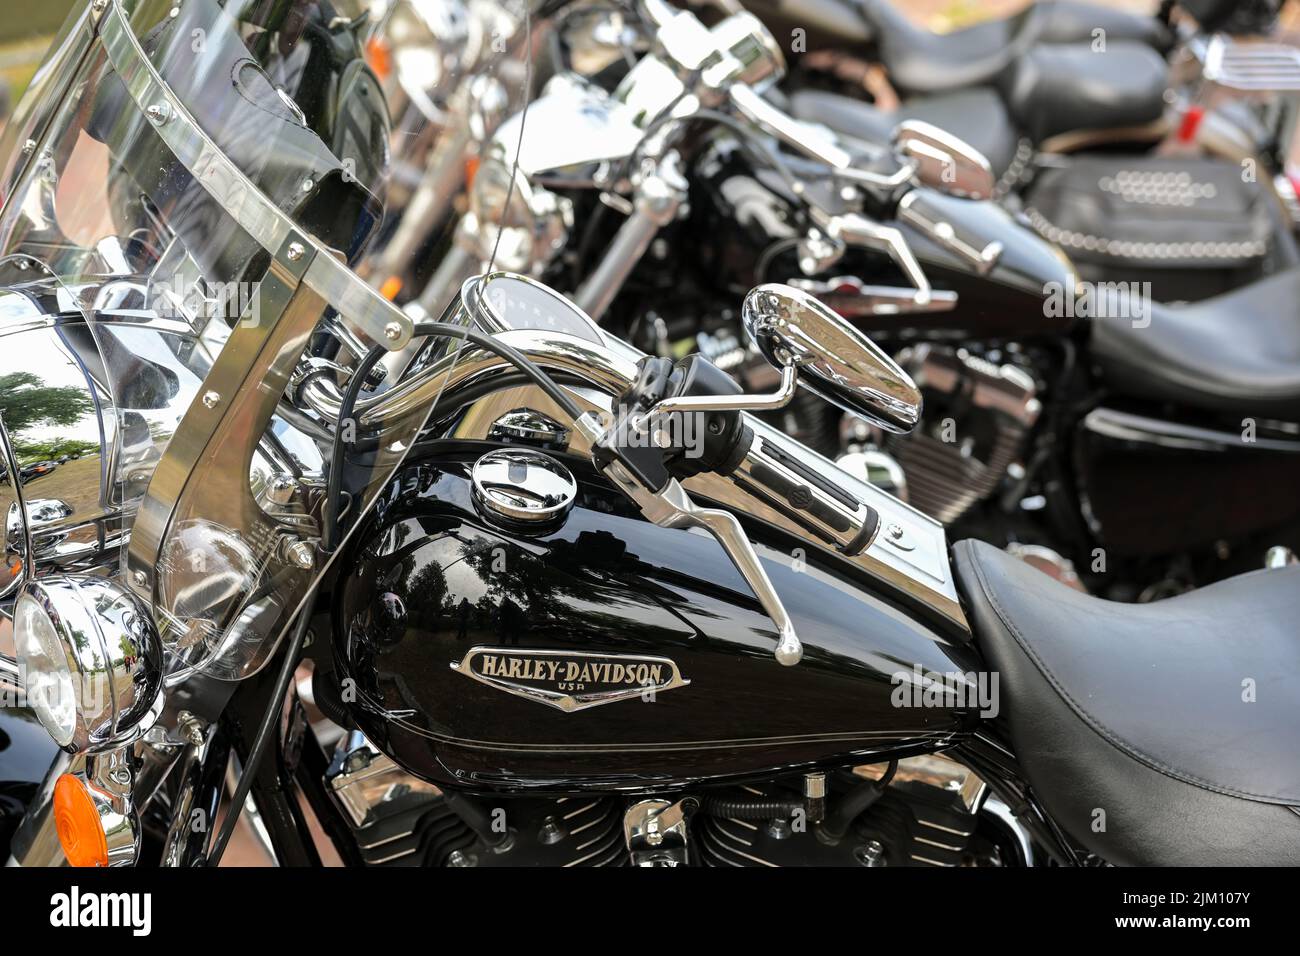 Ratzeburg, Germany, July 31, 2022: Harley Davidson motorcycles with shiny black pain and chrome, legendary vehicle with cult status, selected focus on Stock Photo